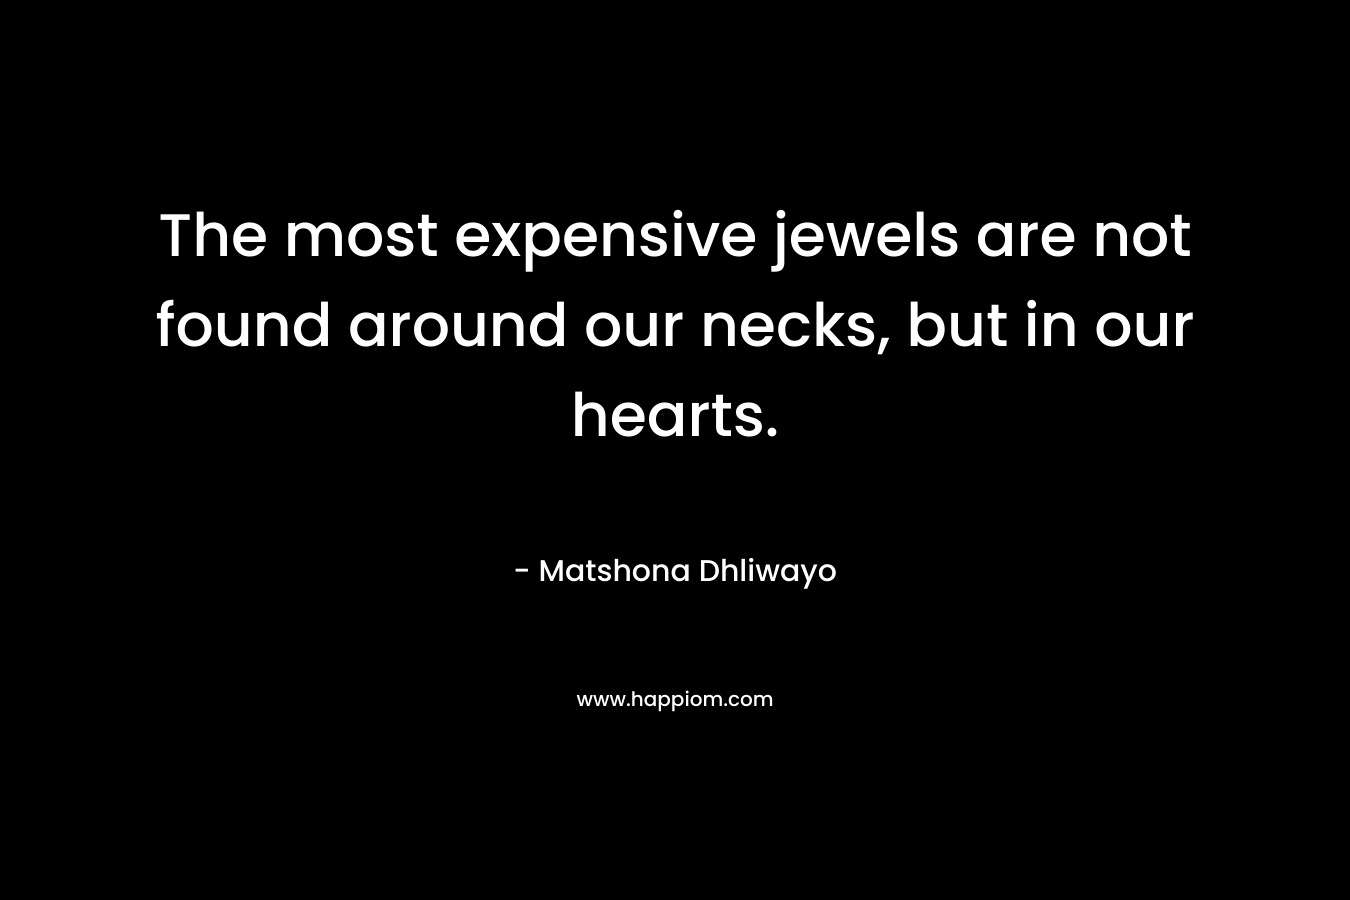 The most expensive jewels are not found around our necks, but in our hearts. – Matshona Dhliwayo